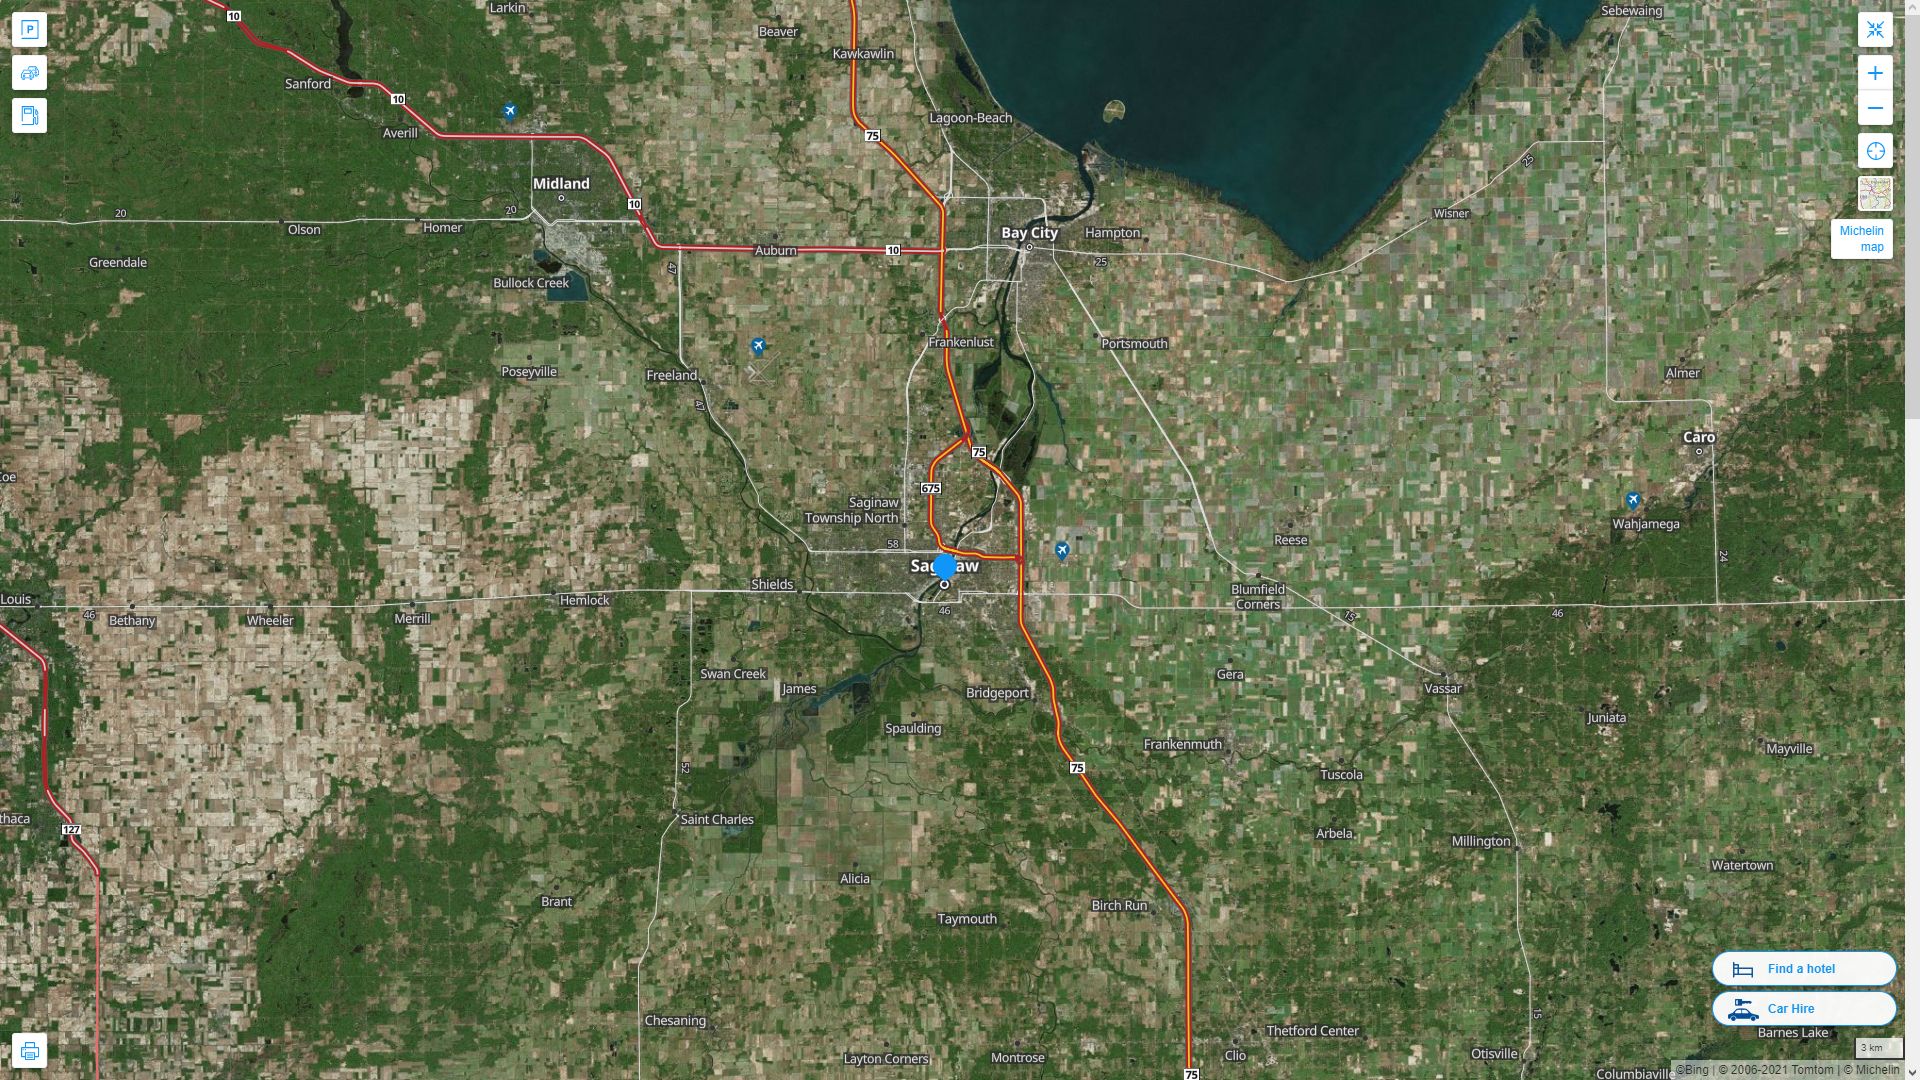 Saginaw Michigan Highway and Road Map with Satellite View